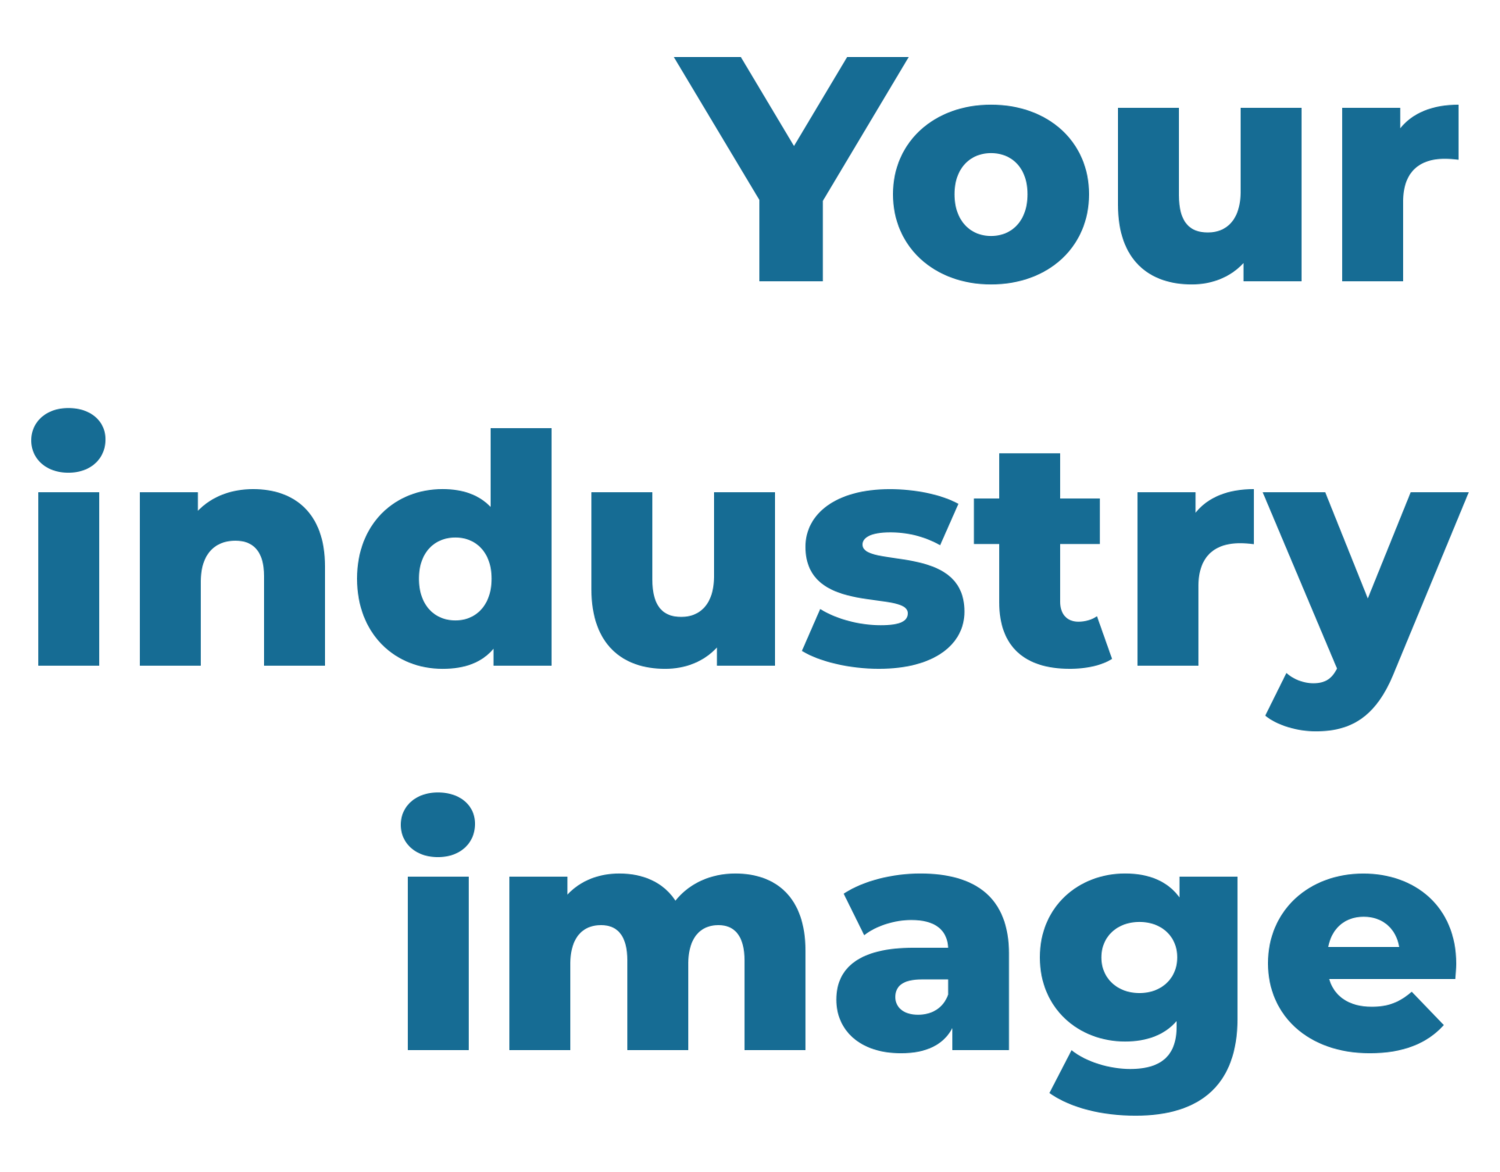 Your industry image